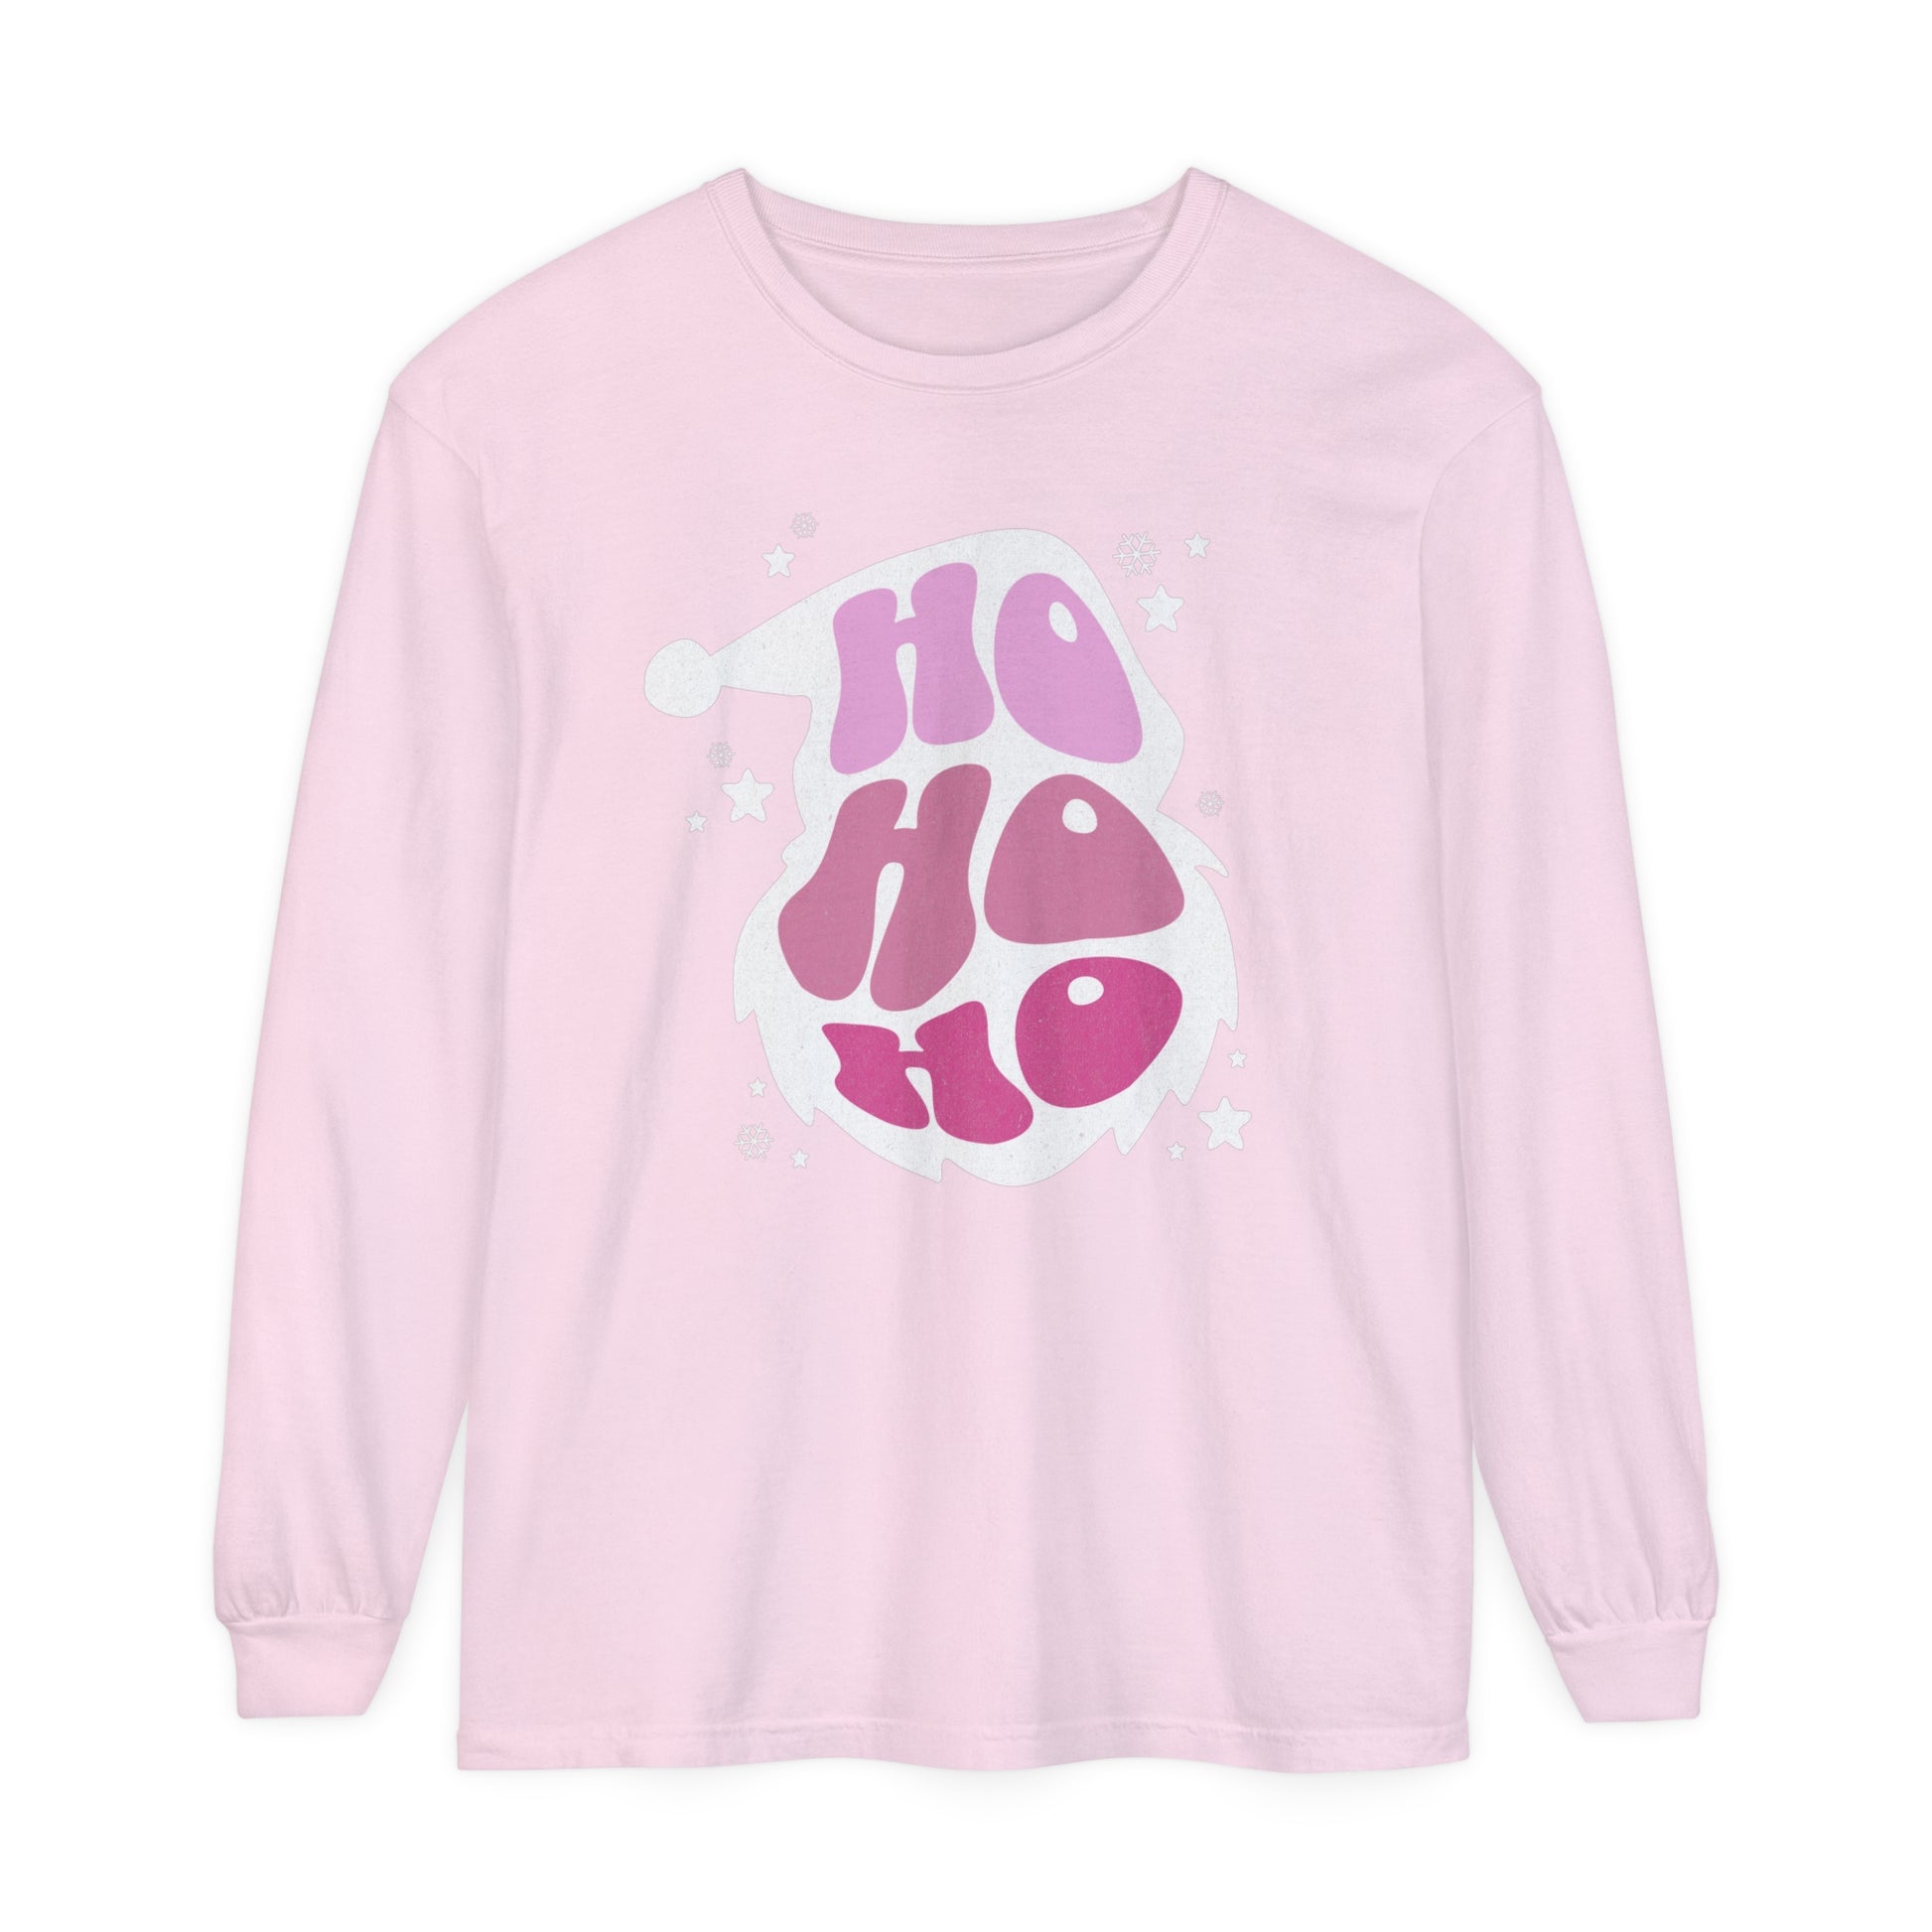 A HO HO HO Santa Outline Pink Long Sleeve Tee - Cozy Comfort Colors Unisex Shirt - Crewneck Holiday tee by Printify with the word "hoo" on it.